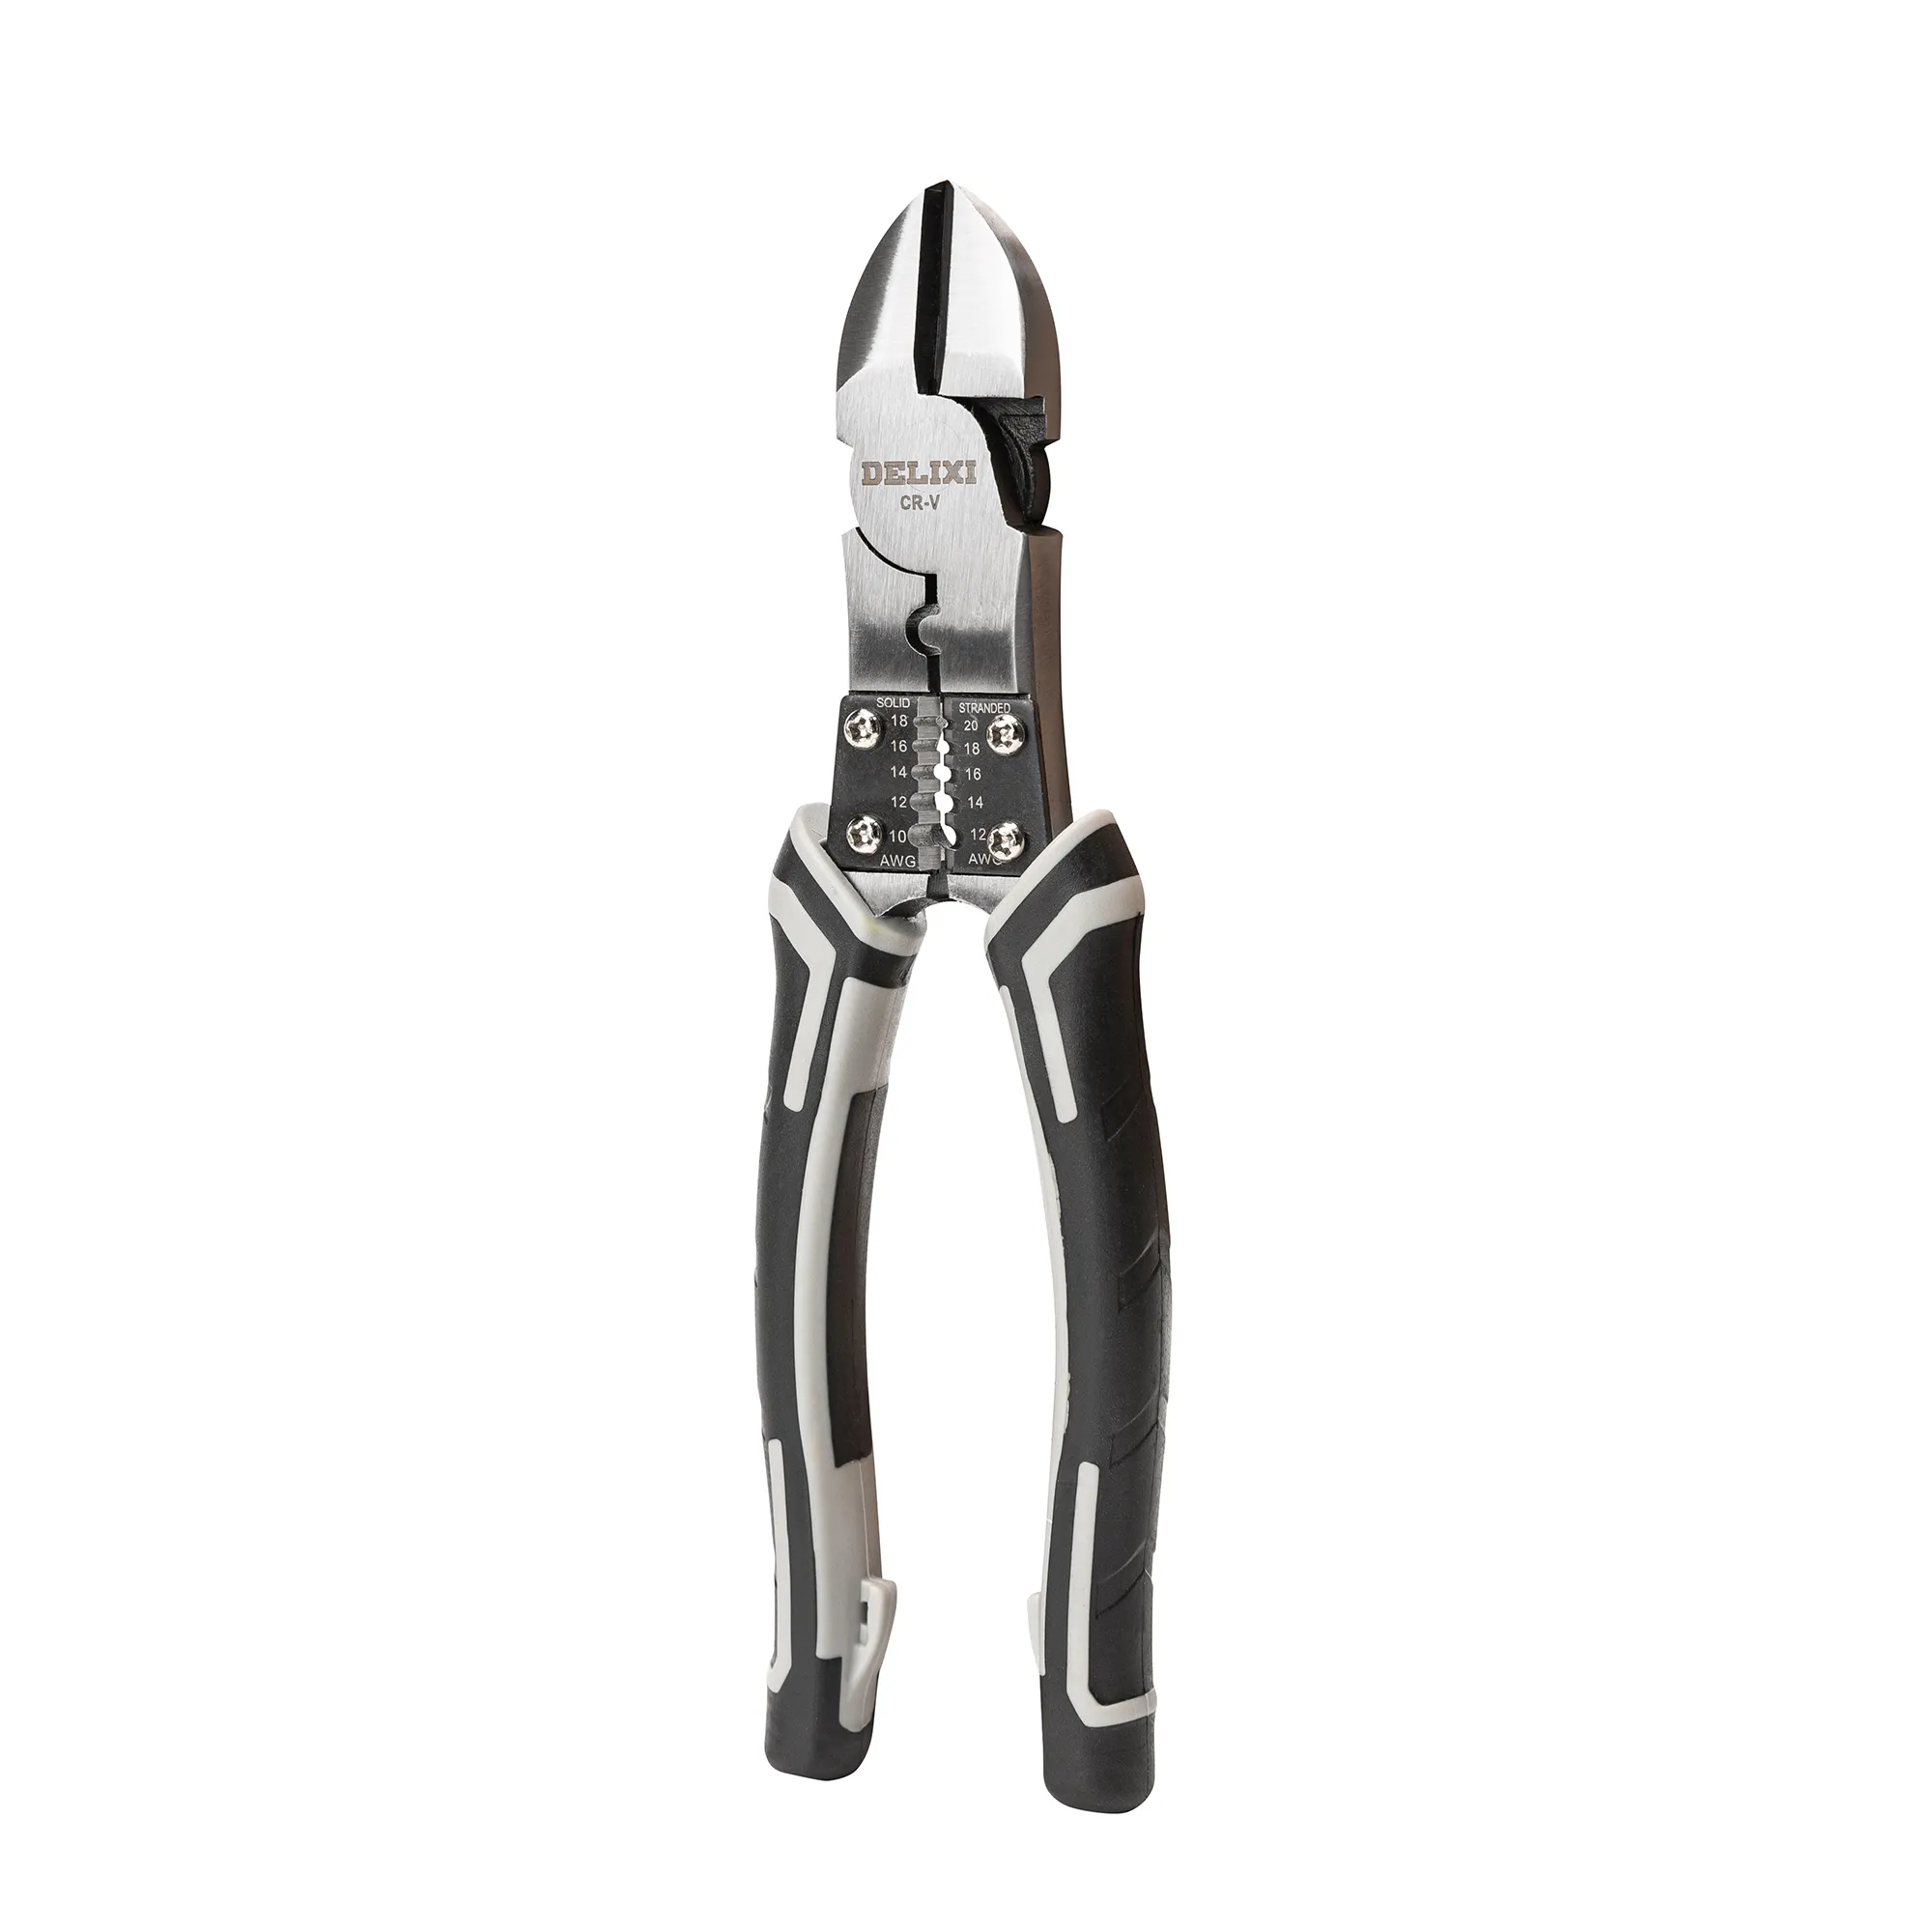 Delixi wire stripper multifunctional electrician crimping pliers wire cutting pliers cable scissors stripper wire stripping plie